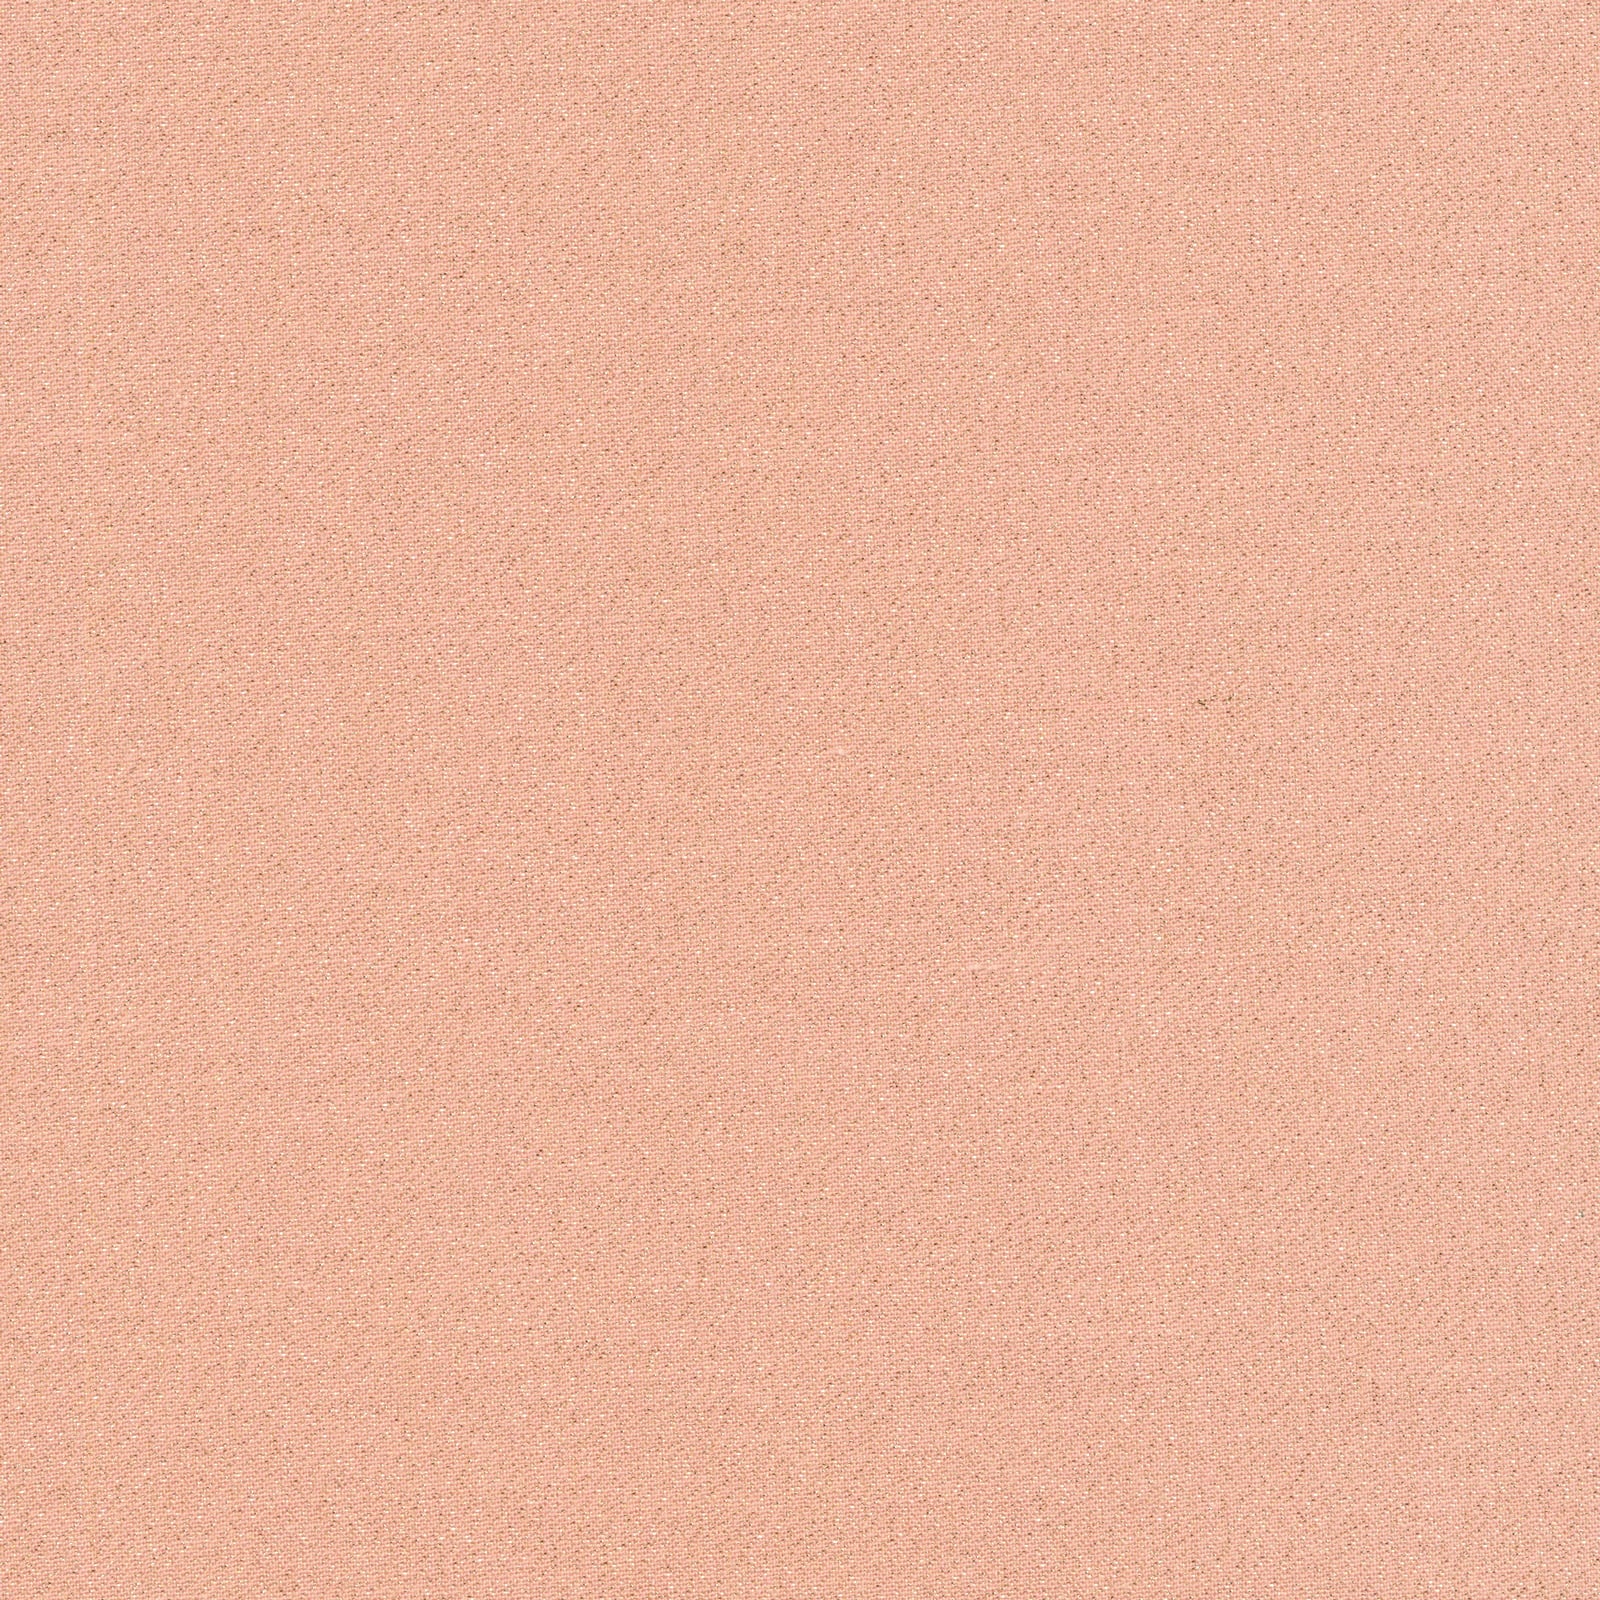 Glimmer Solids ROSE GOLD by Cloud9  - Organic Cotton Broadcloth